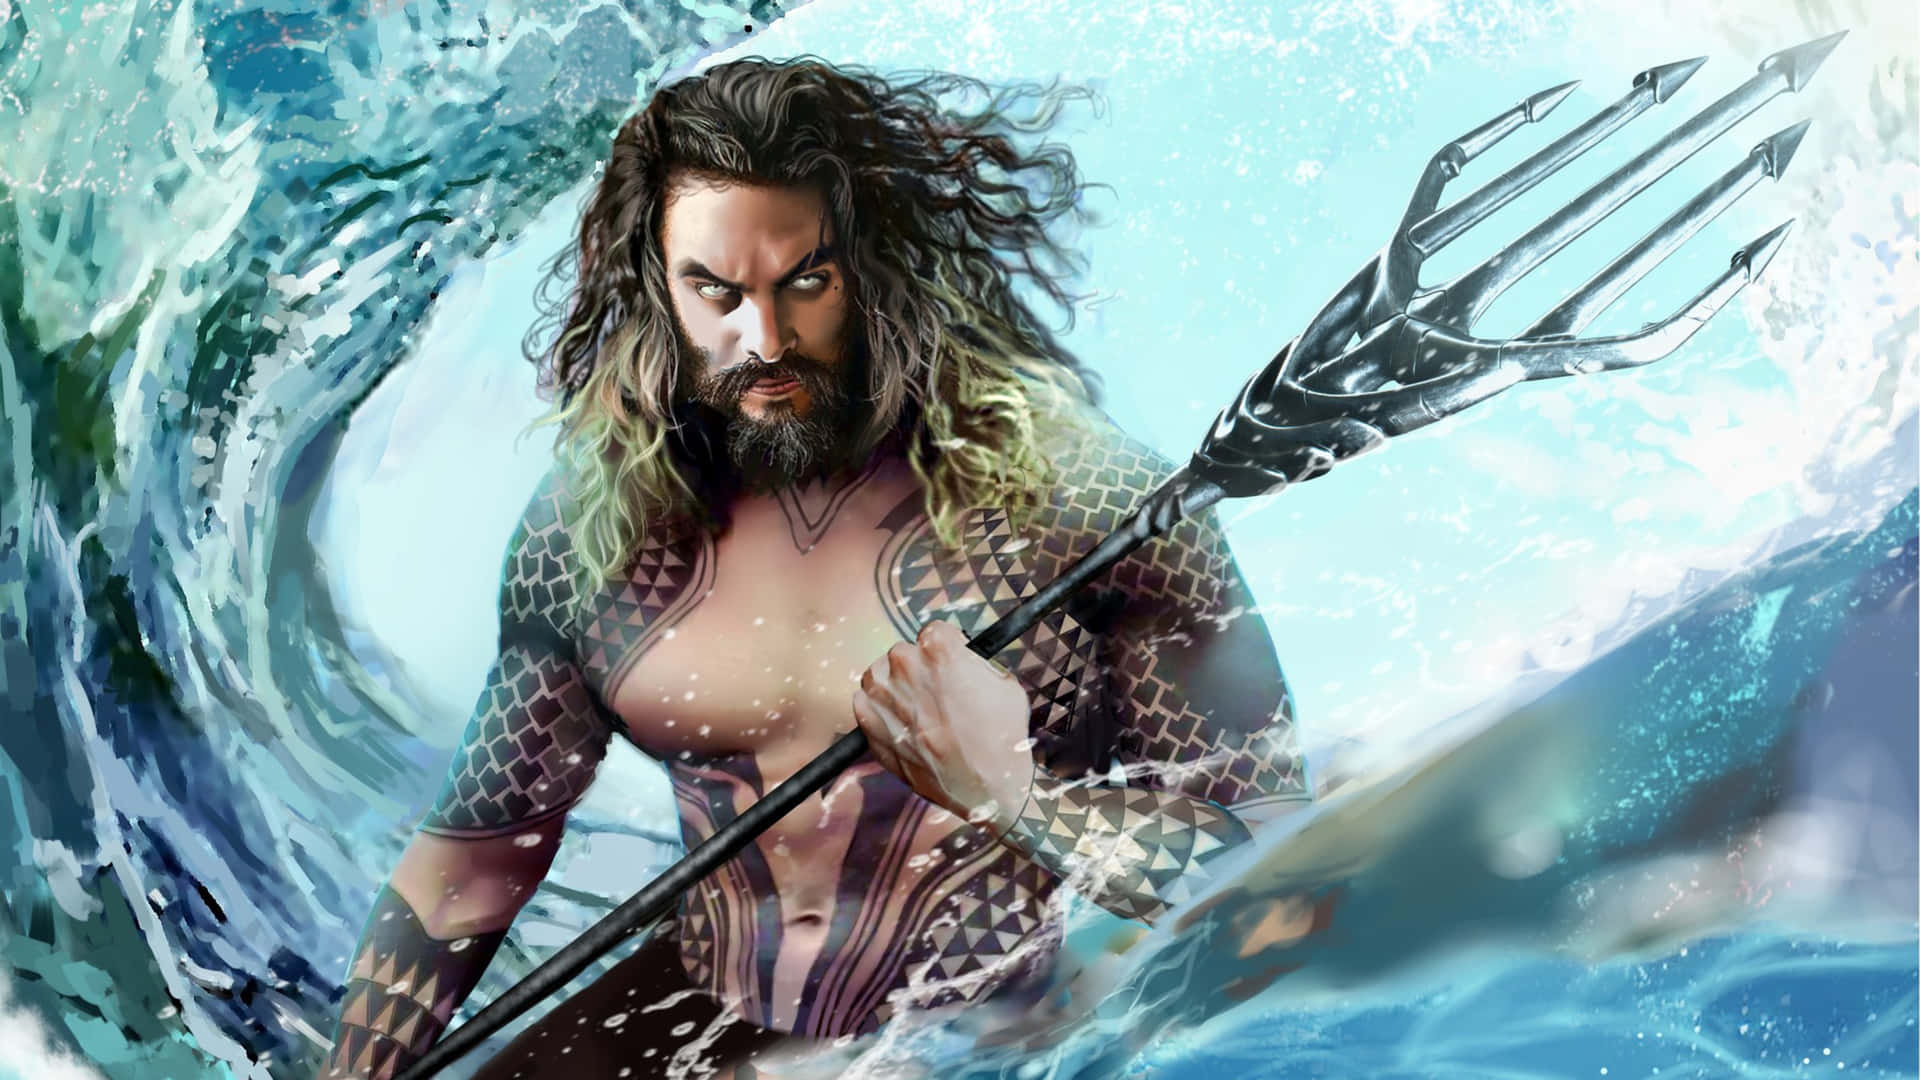 Get to know ‘Aquaman’ and his amazing aquatic superpowers